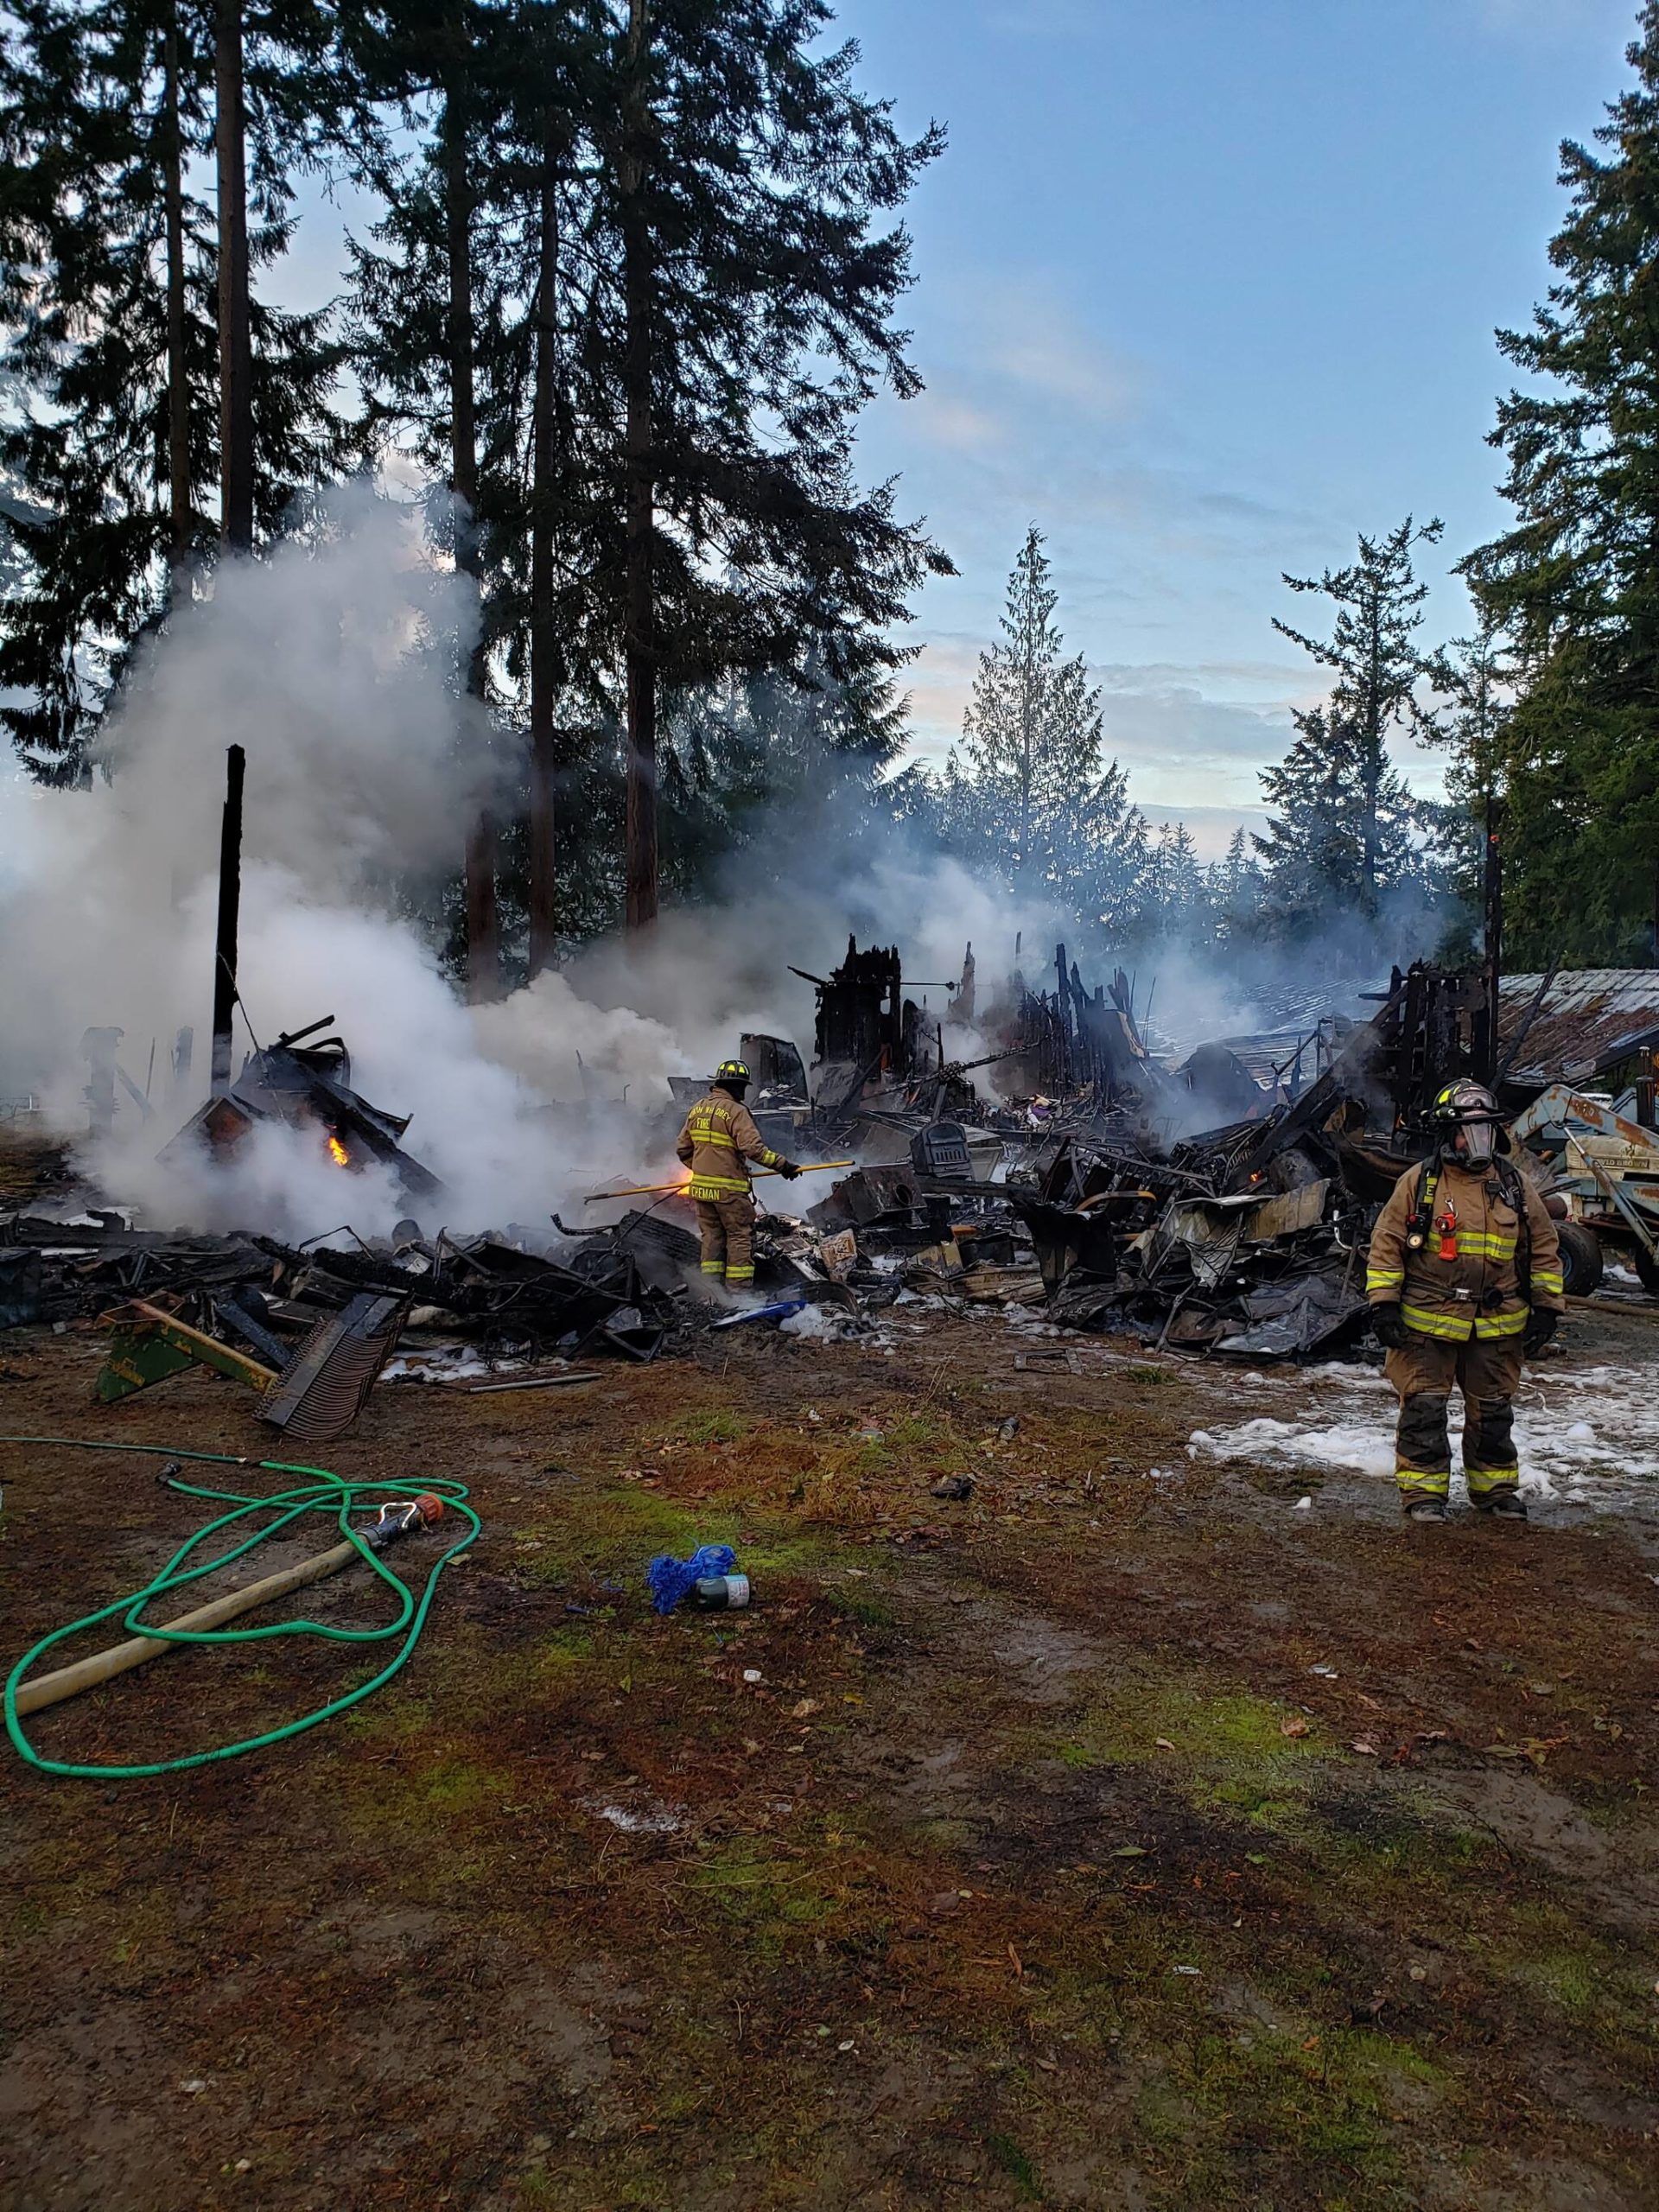 Photo provided
North Whidbey Fire and Rescue firefighters subdue a structure fire on Cerullo Drive the morning of Dec. 3.